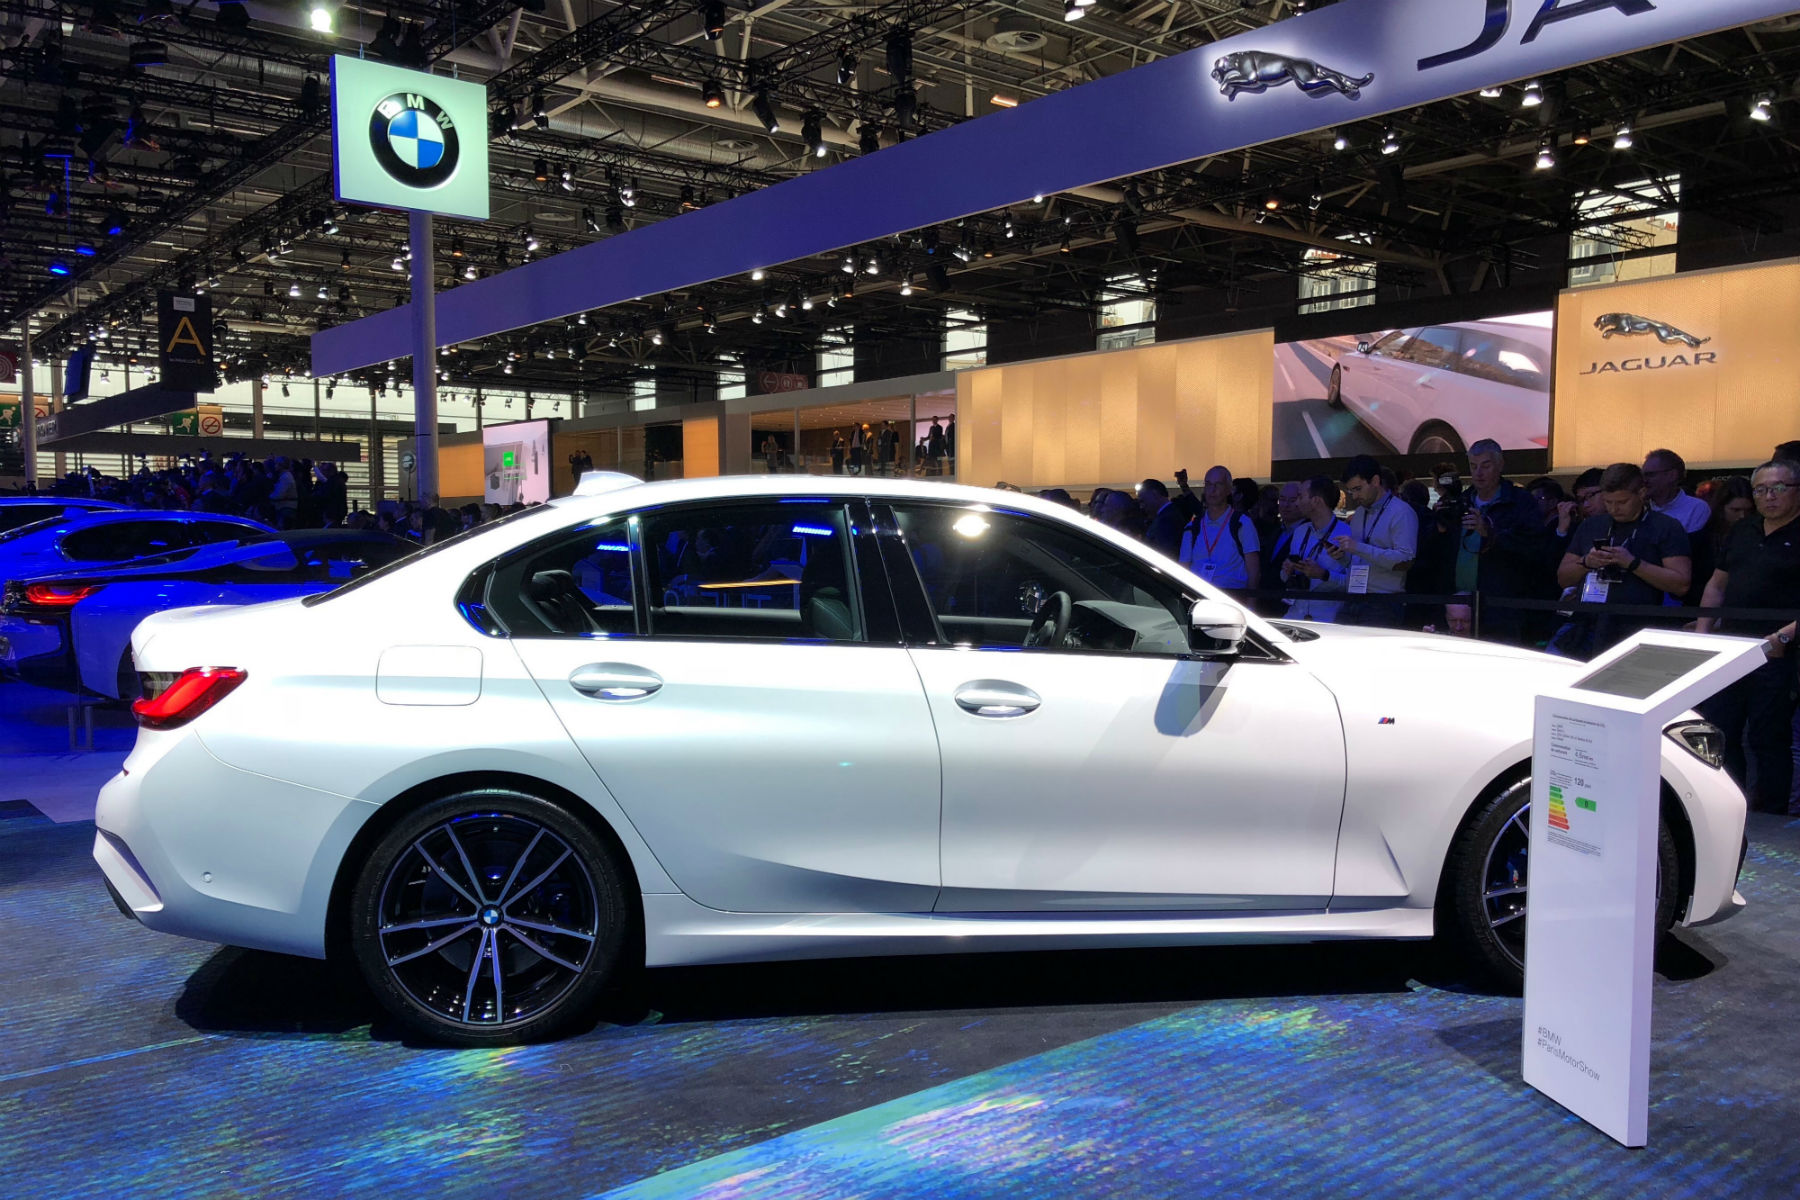 New 2019 Bmw 3 Series Everything You Need To Know